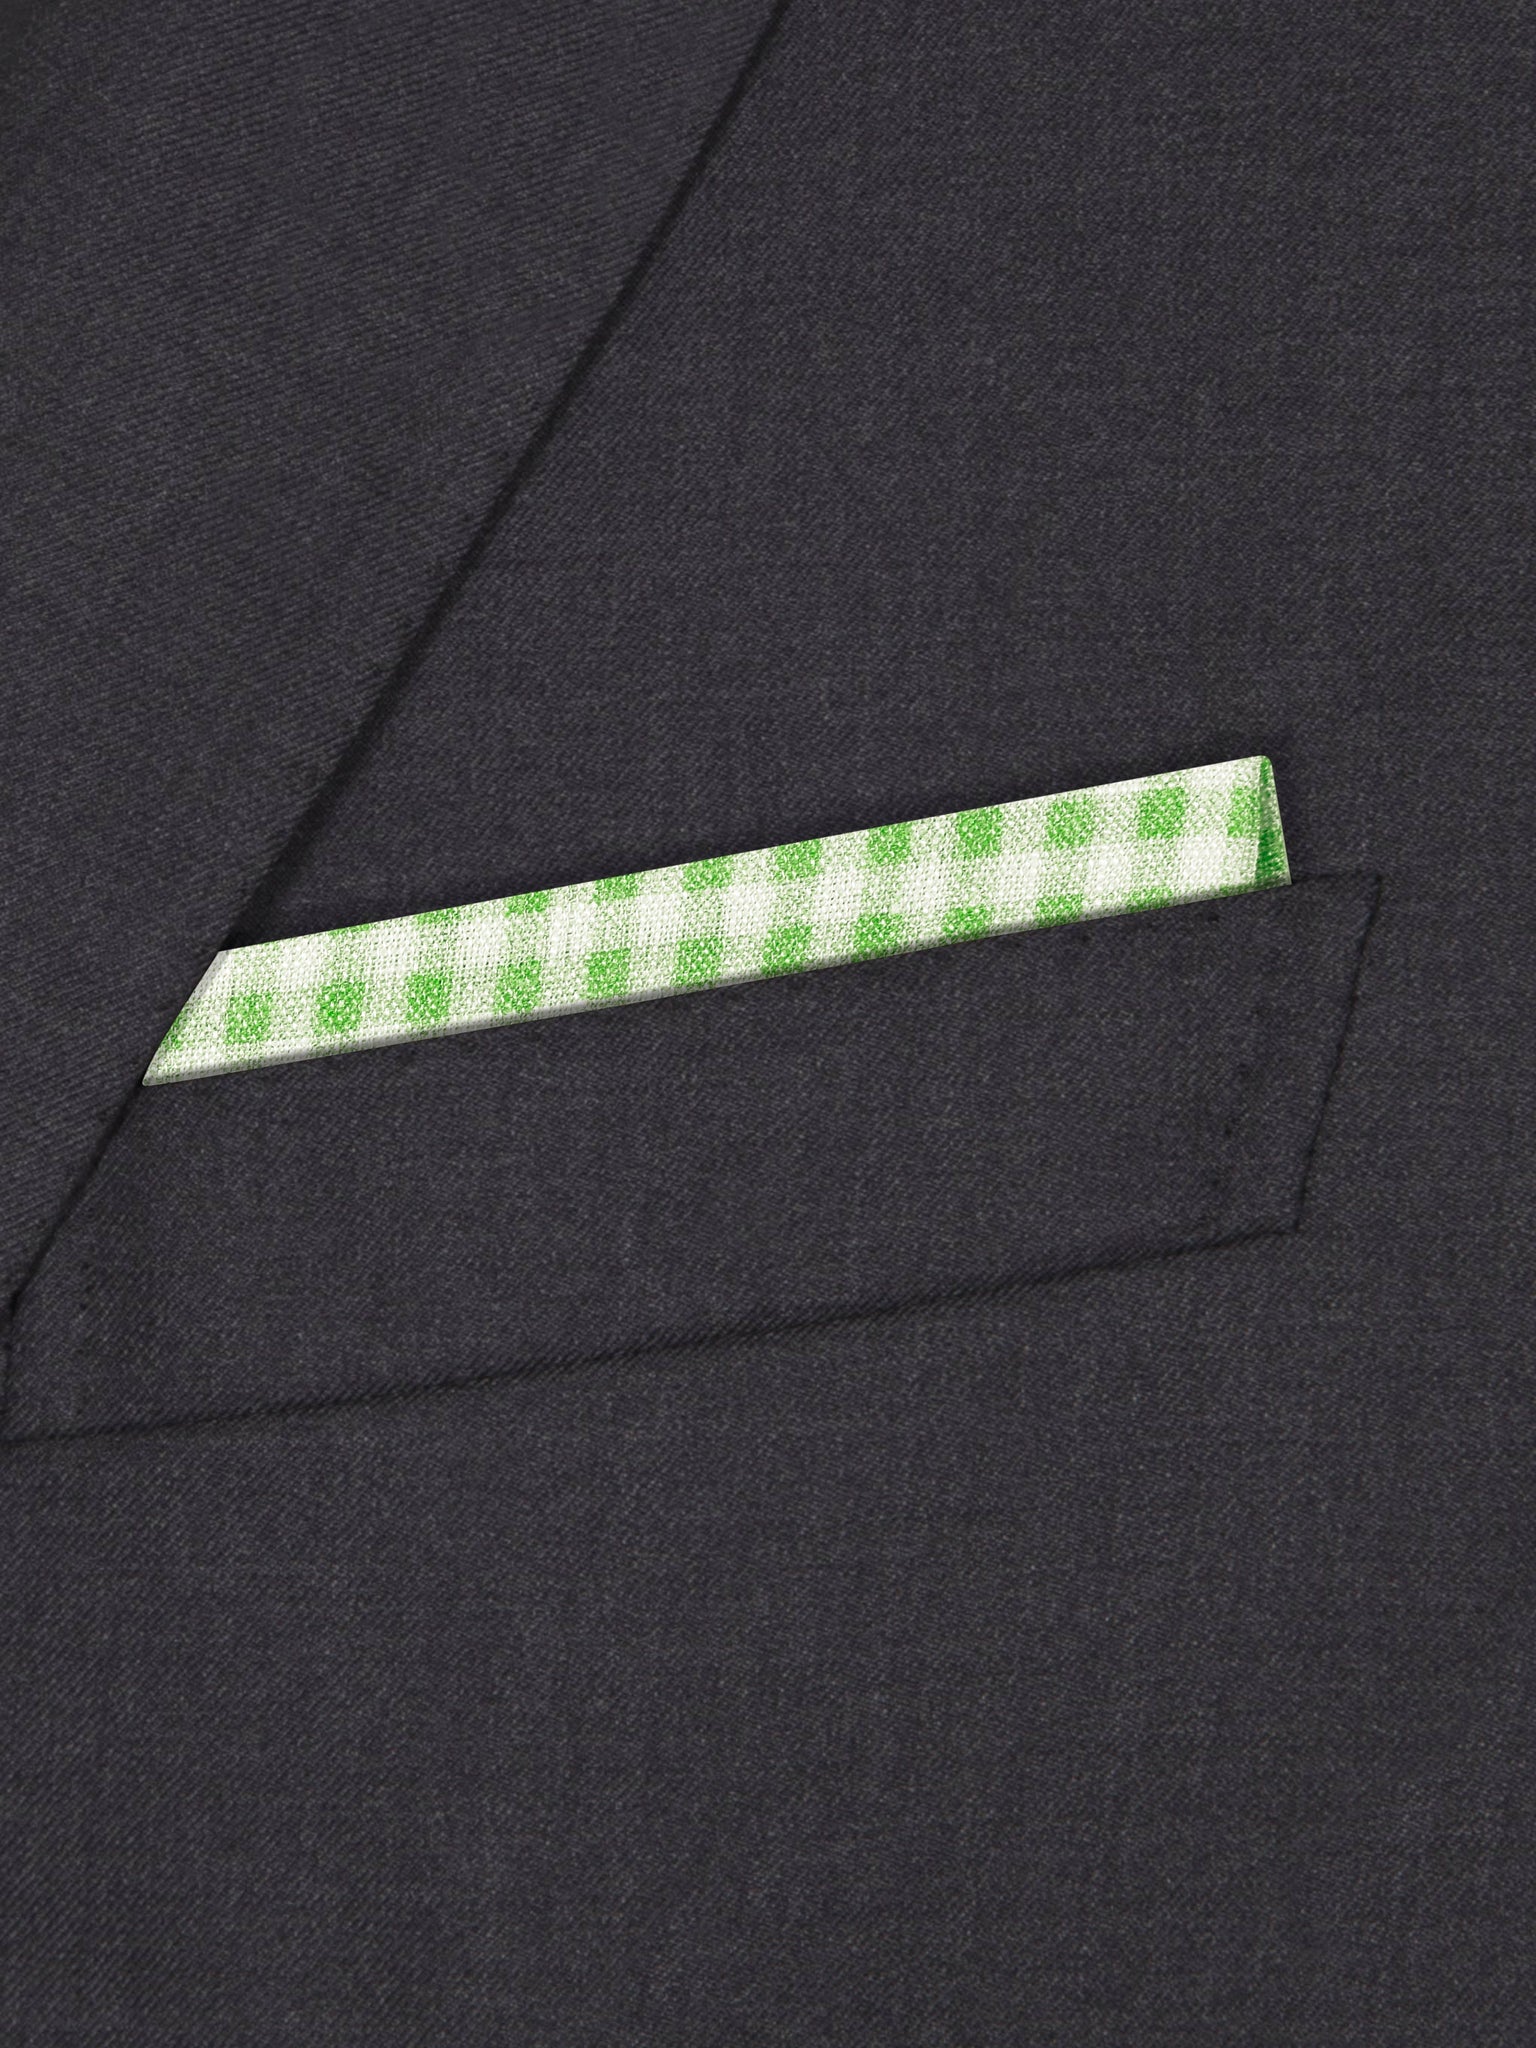 Checkered Past (Green)